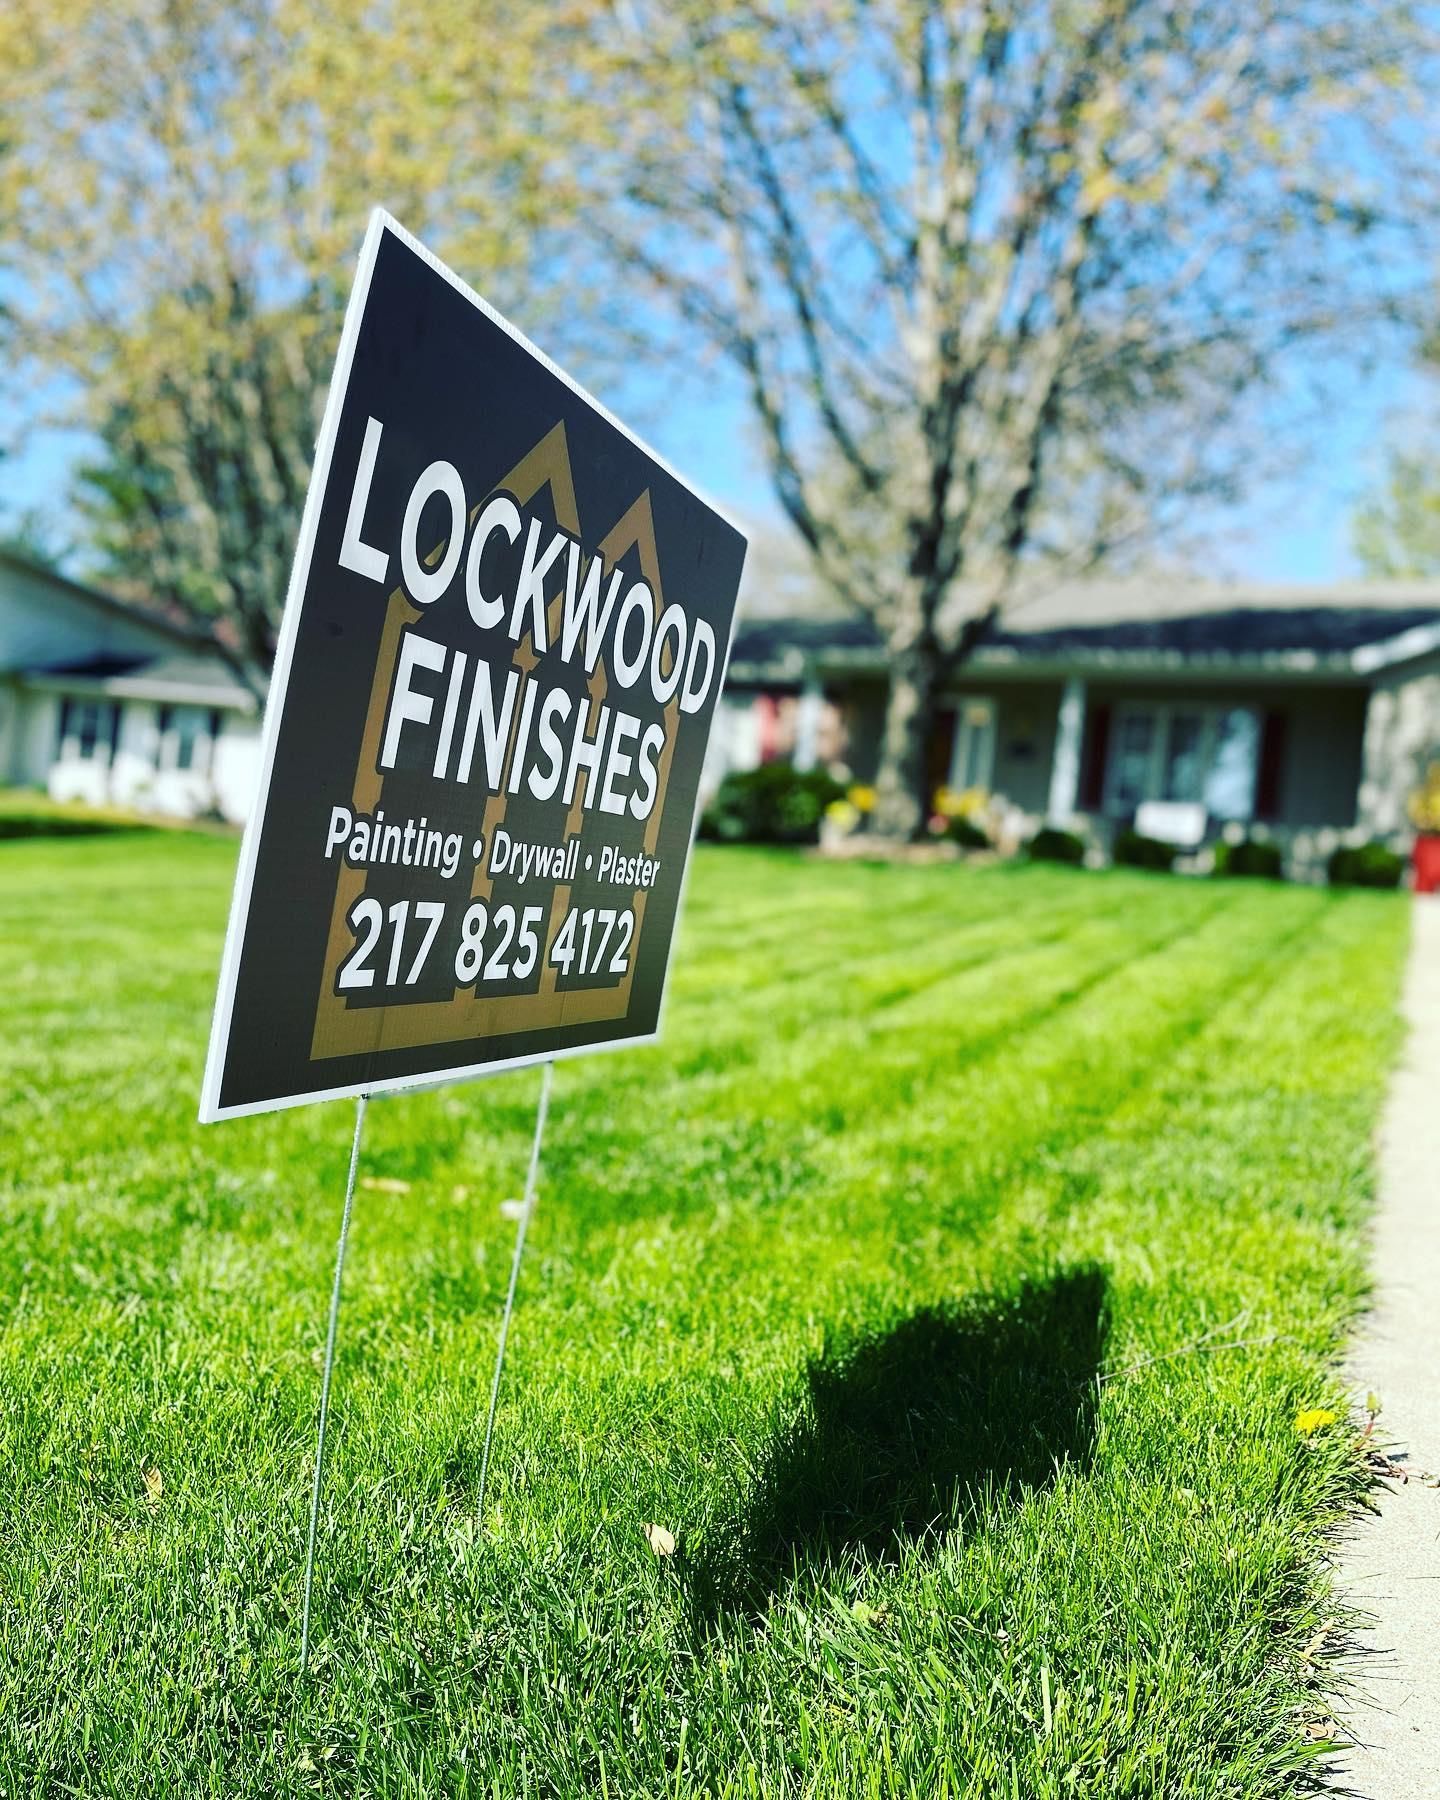  for LOCKWOOD FINISHES in Springfield, IL